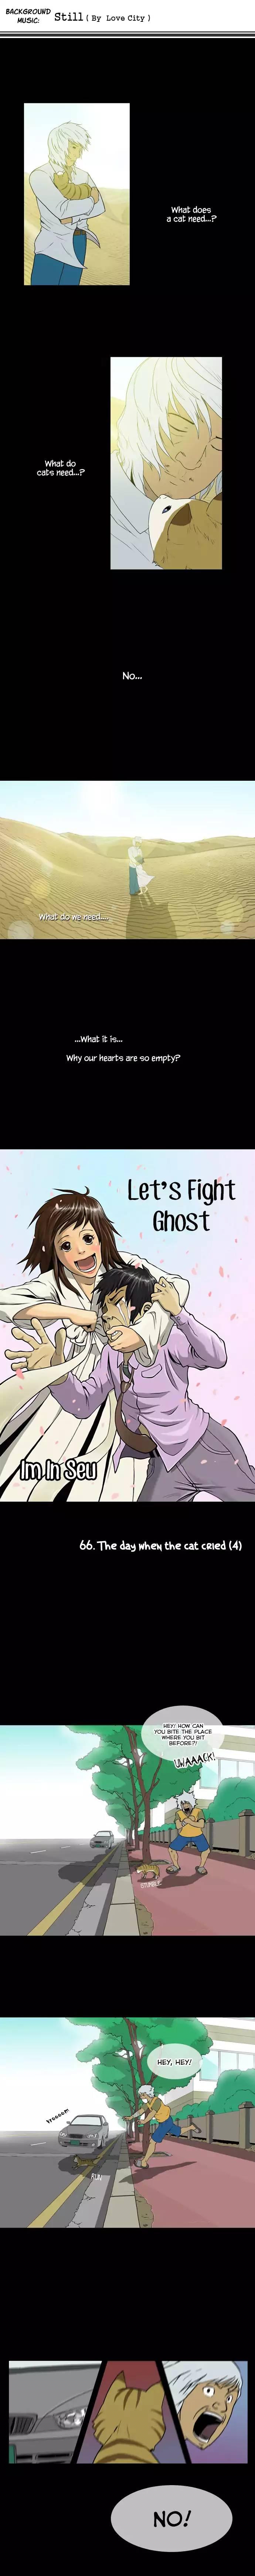 Let's Fight Ghost Manhwa - episode 73 - 0